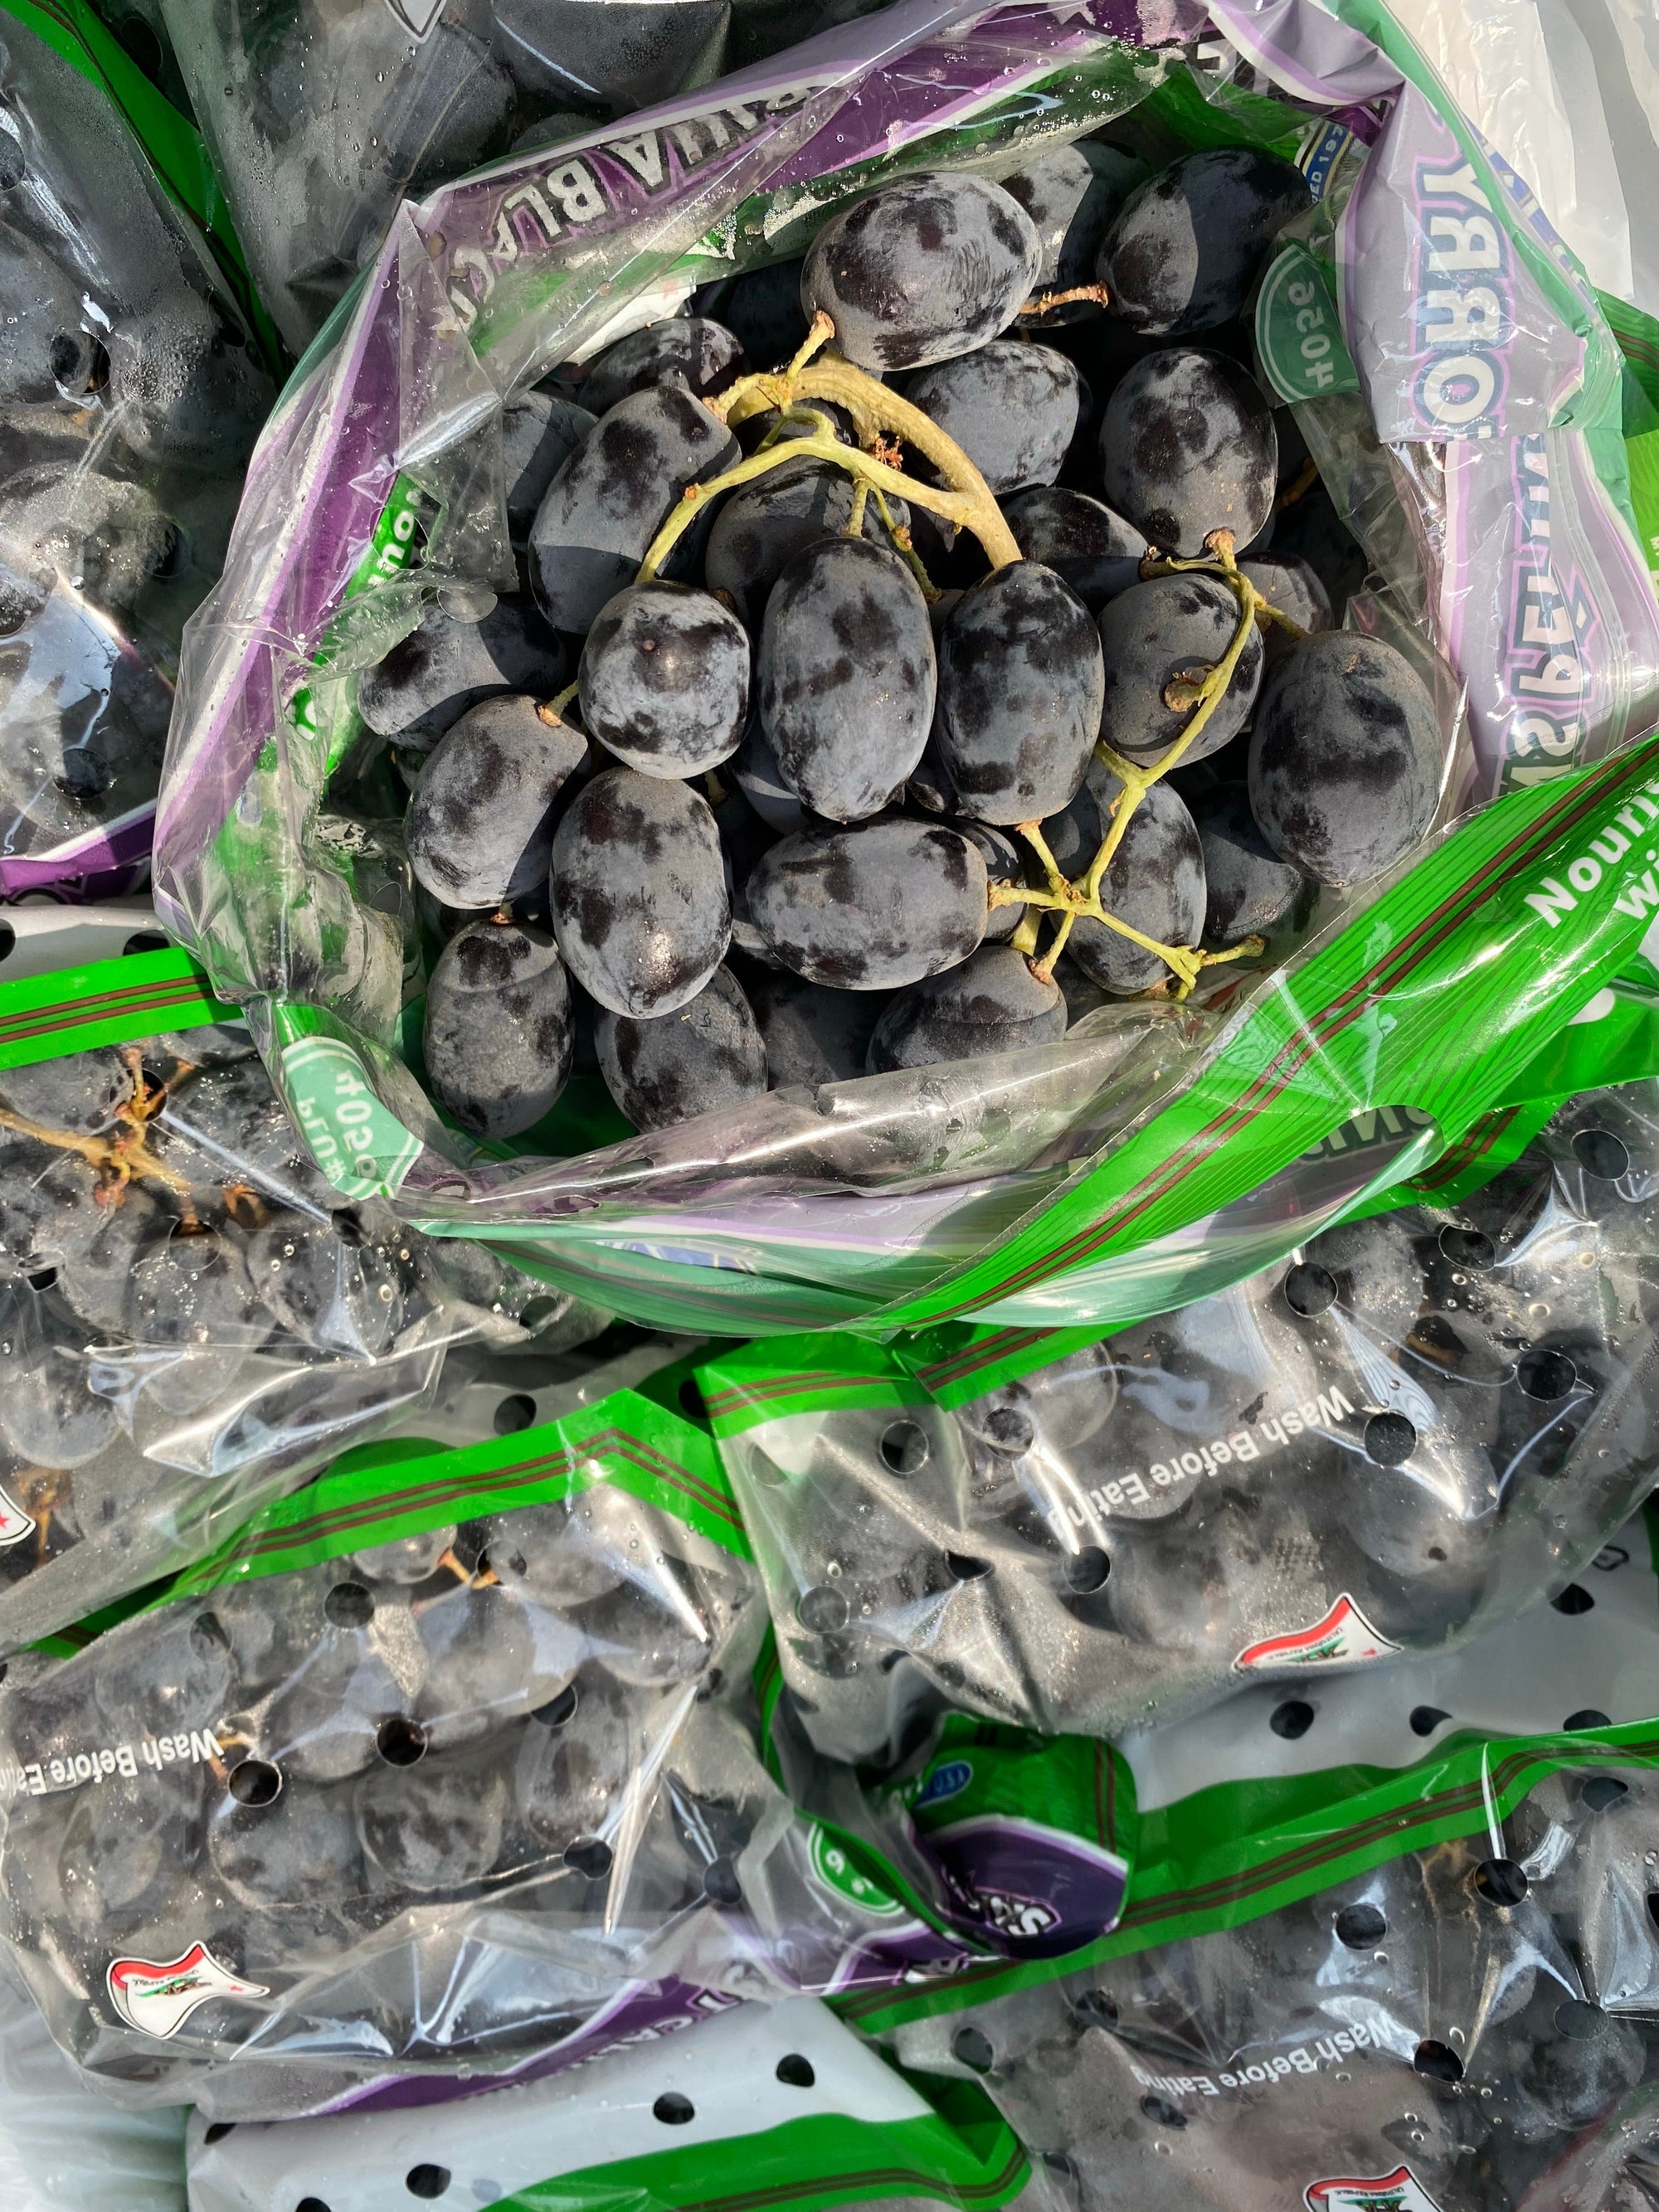 Buy 2 Aussie Airflown Black Seedless Grapes for only Php 800